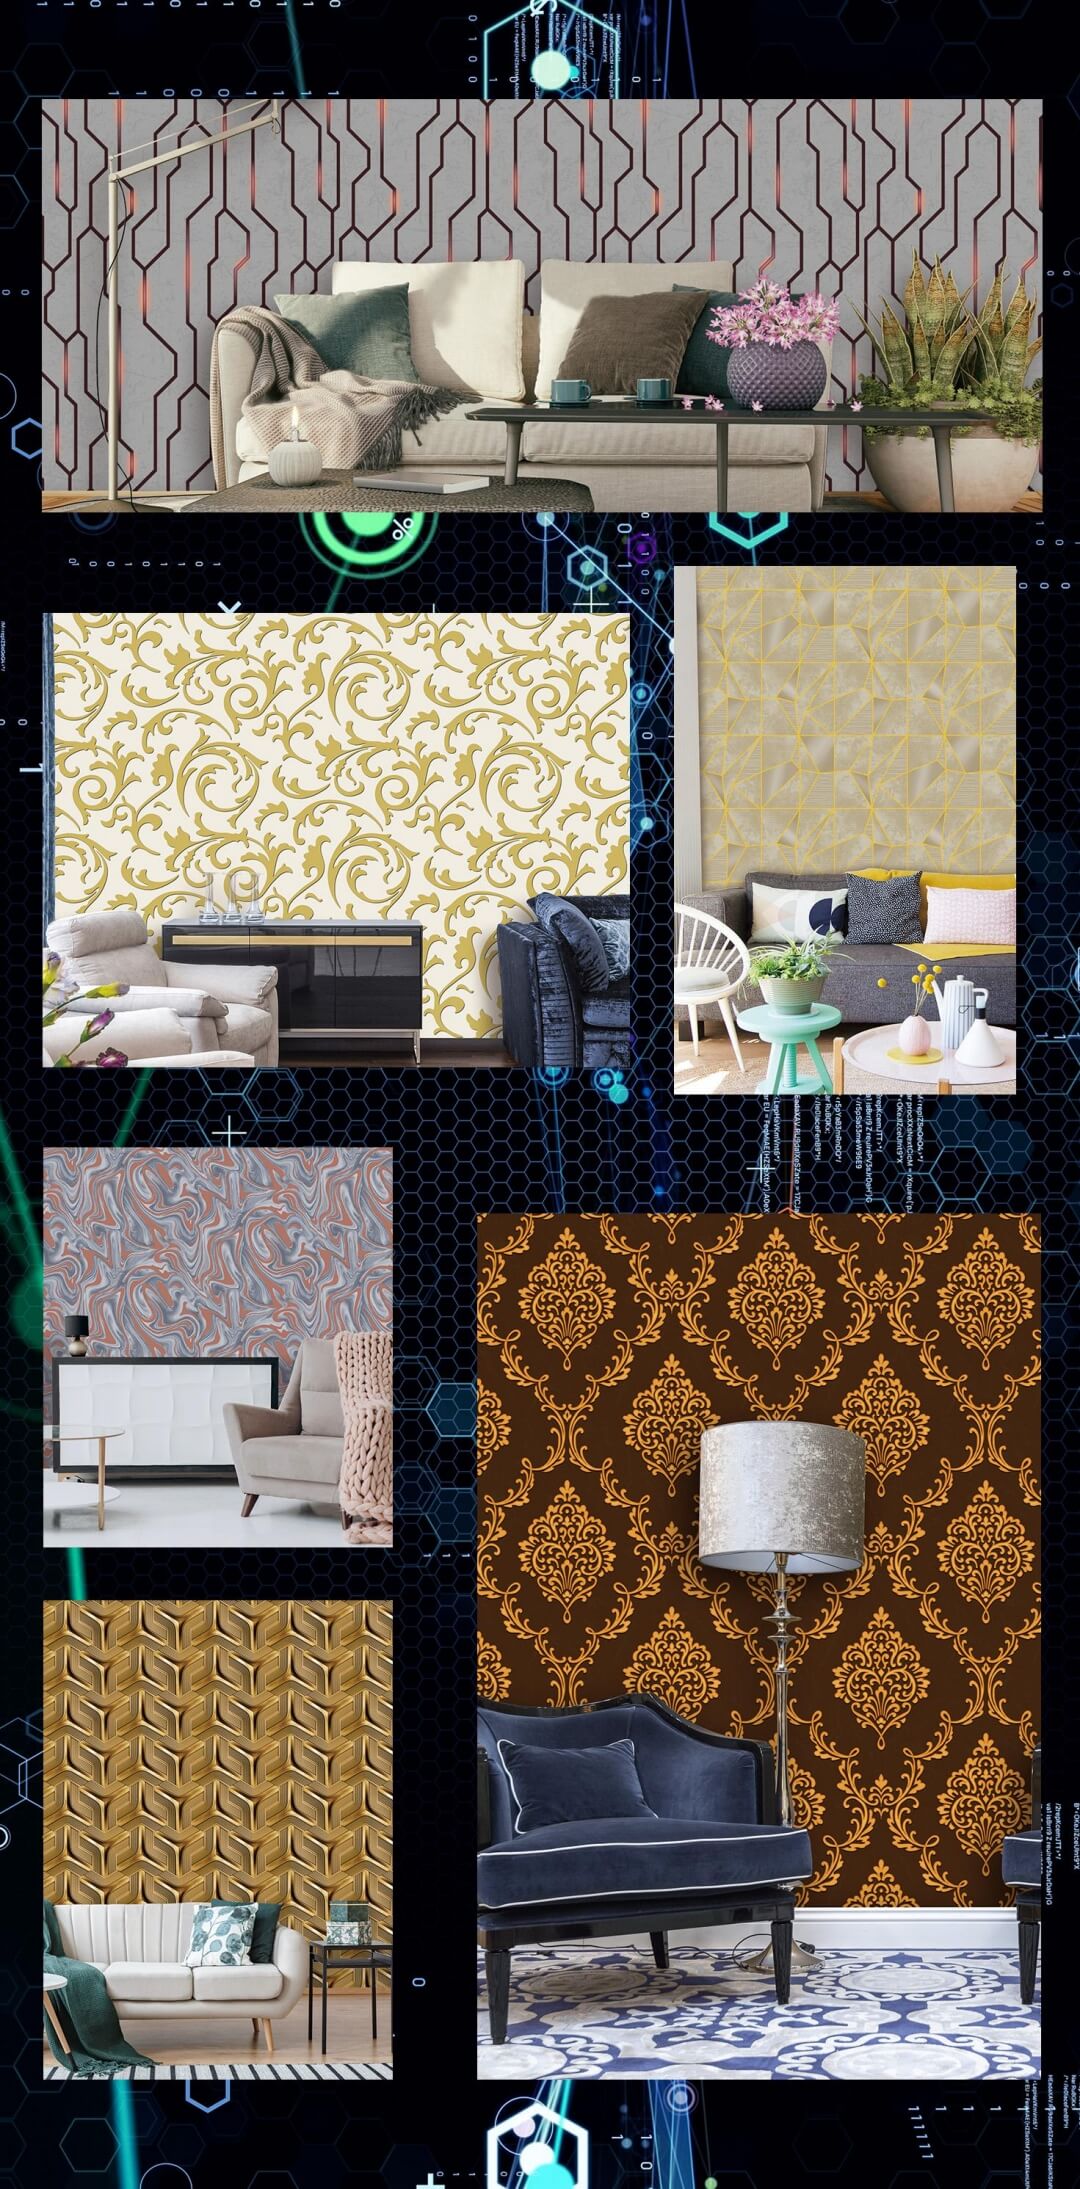 Textured Metallic Wallpaper with Gold Lines (15)